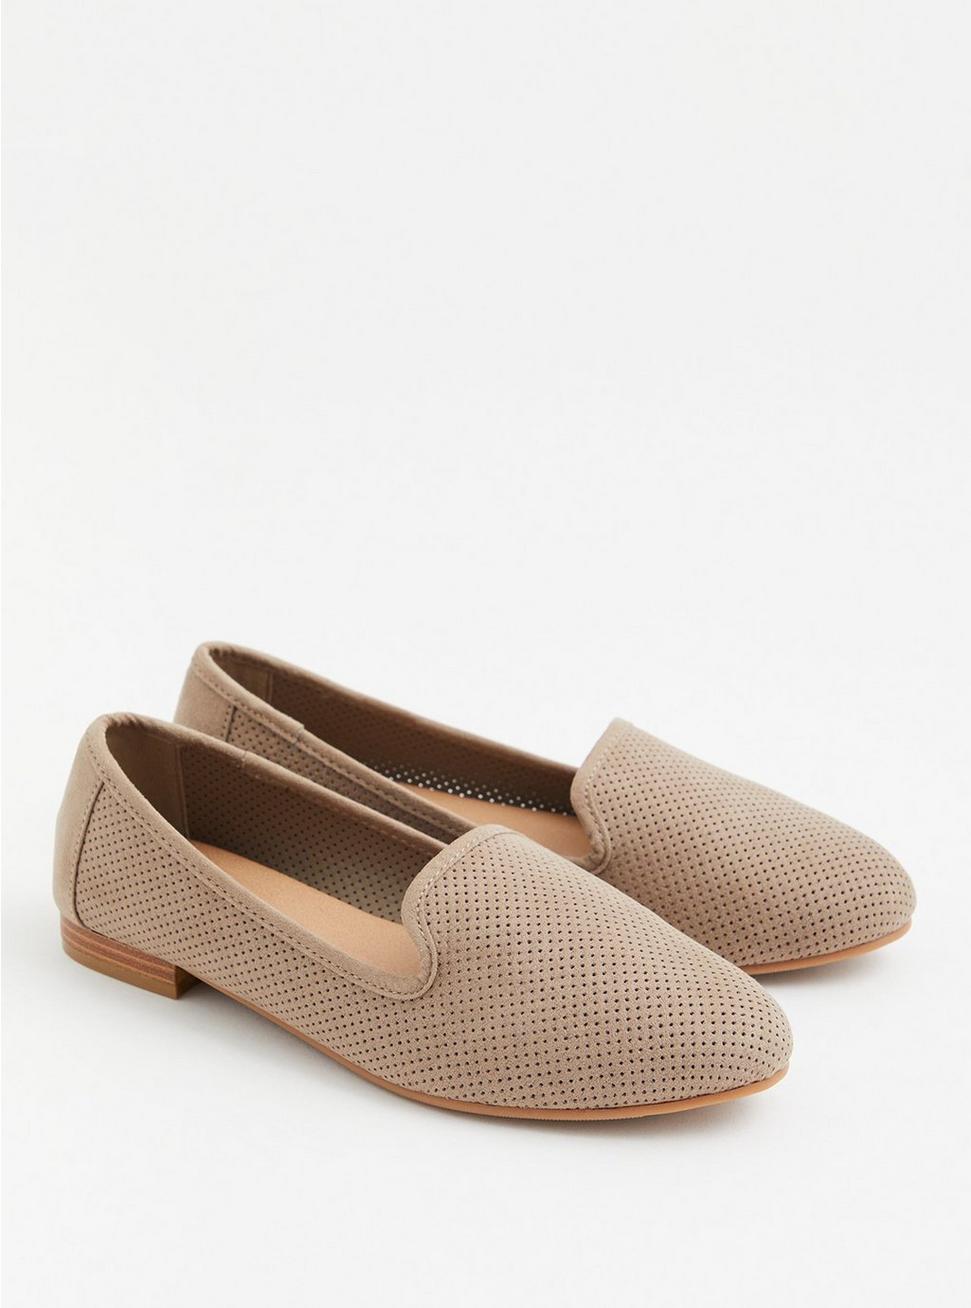 Plus Size Perforated Loafer (WW), TAN BEIGE, hi-res